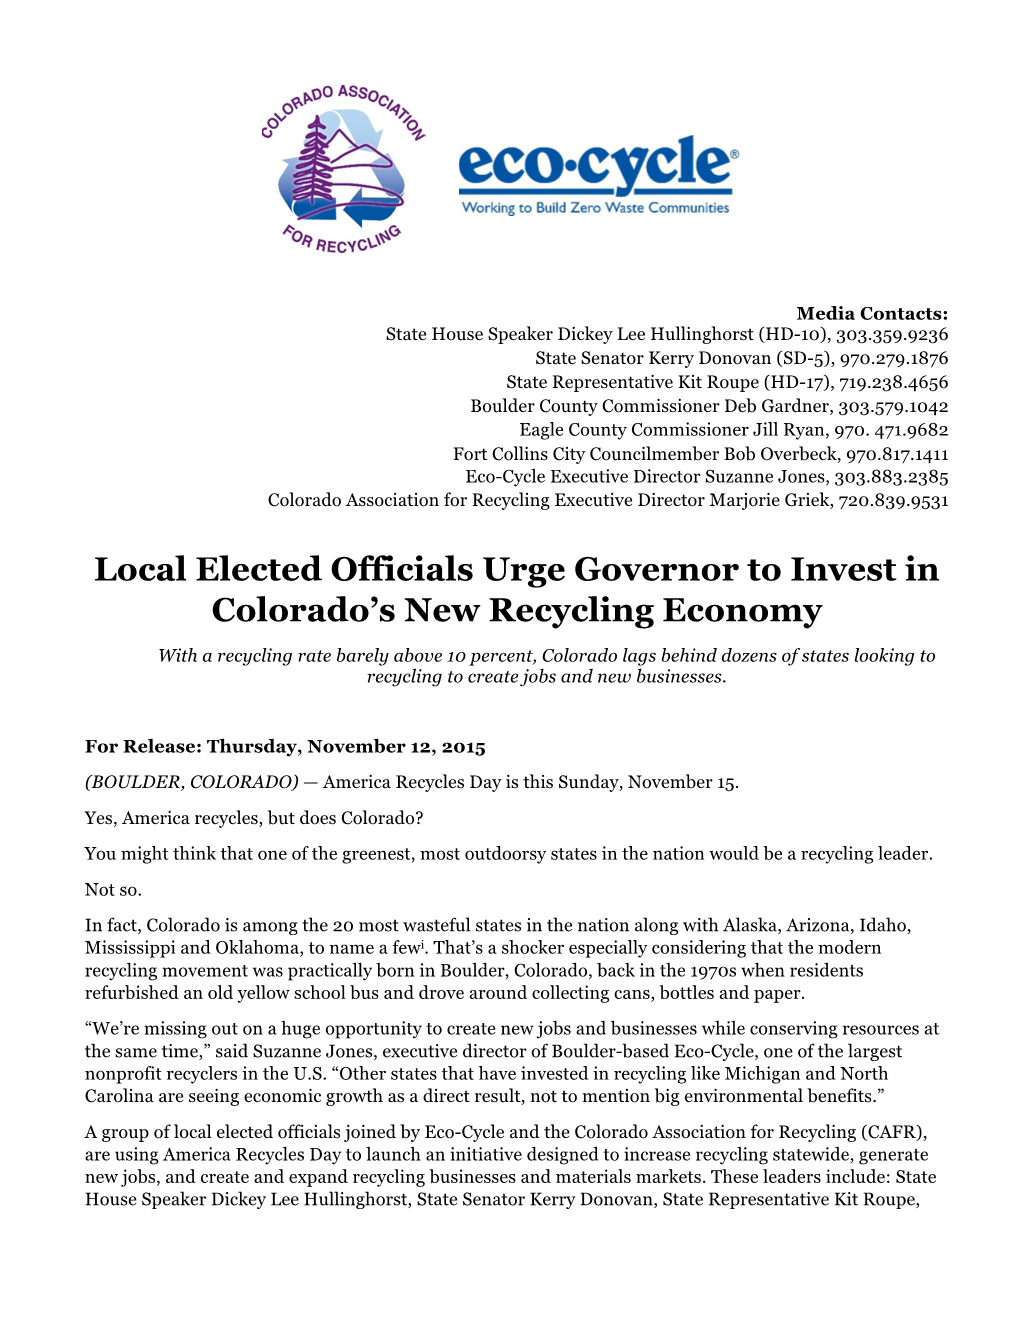 Local Elected Officials Urge Governor to Invest in Colorado's New